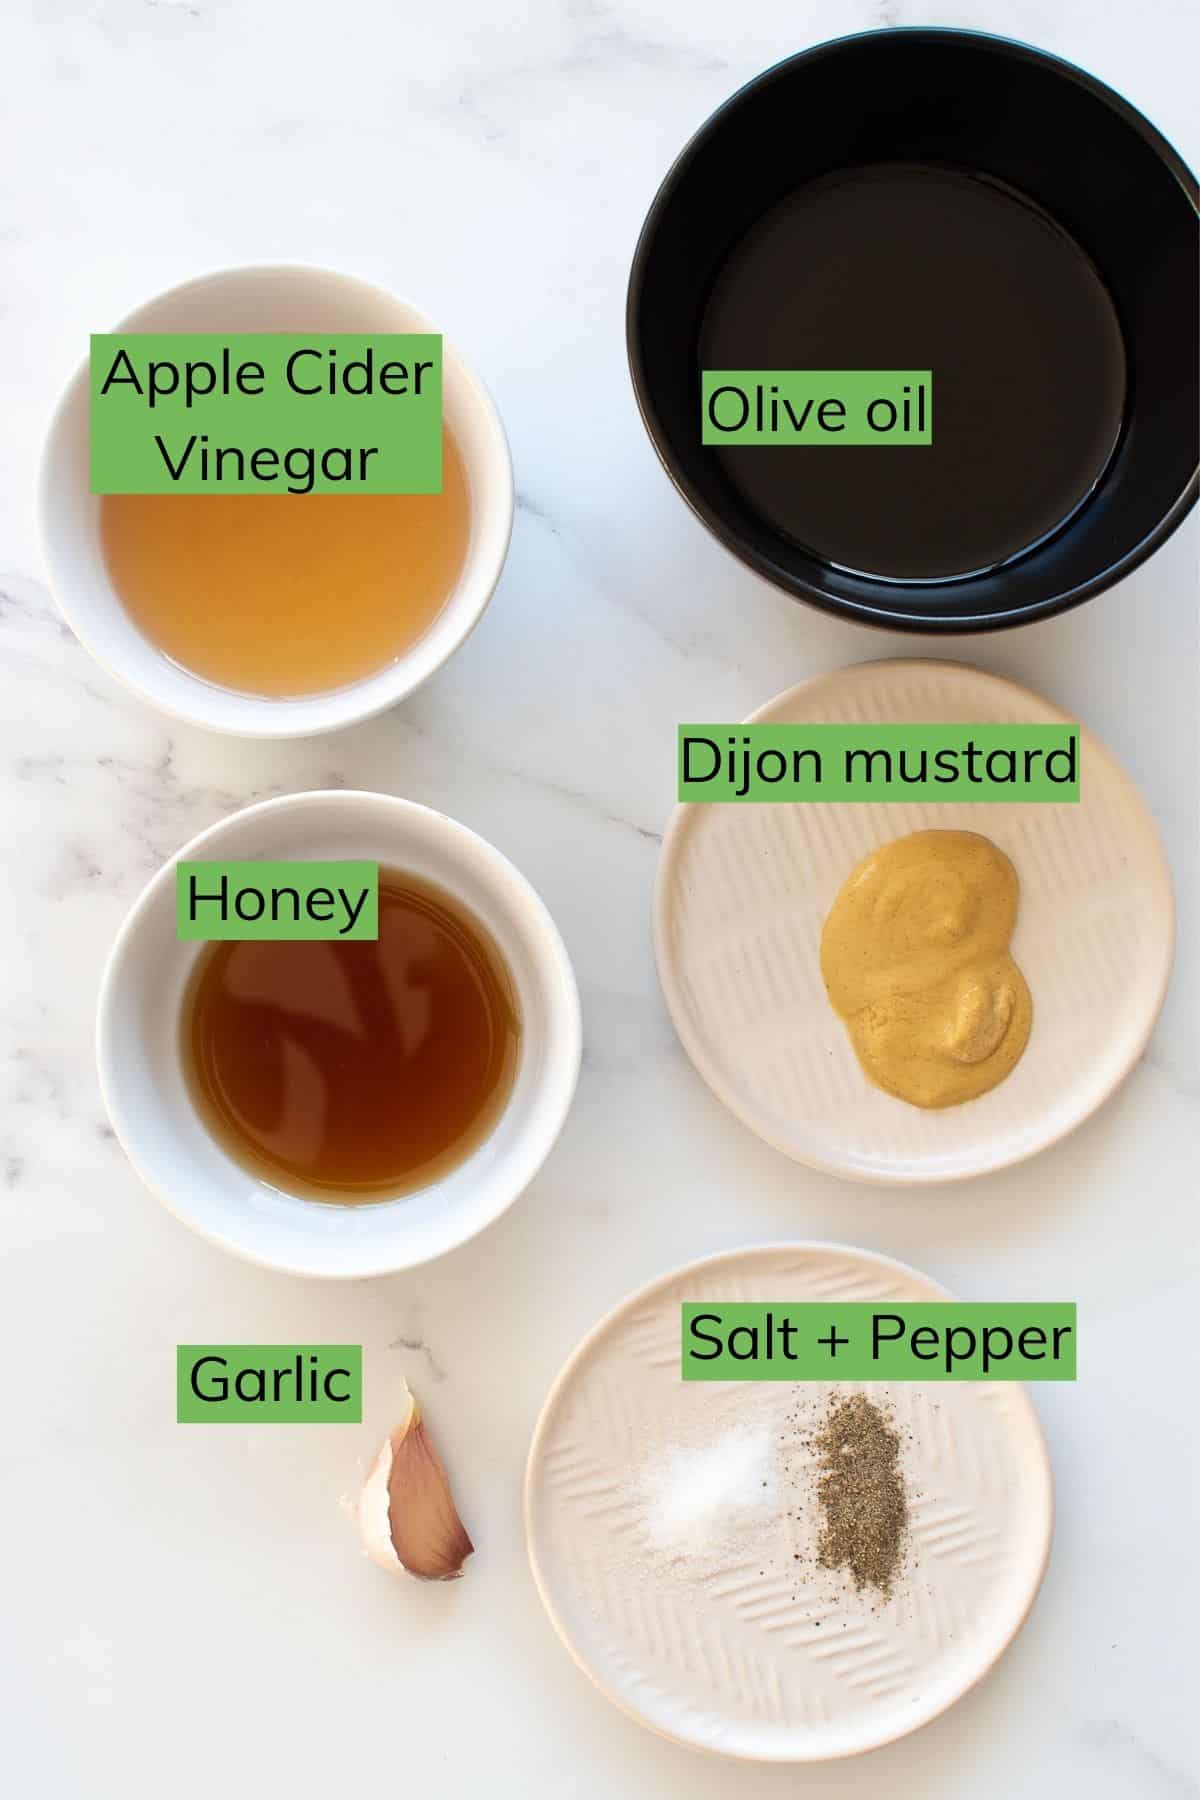 The ingredients required to make apple cider vinaigrette laid out on a table.